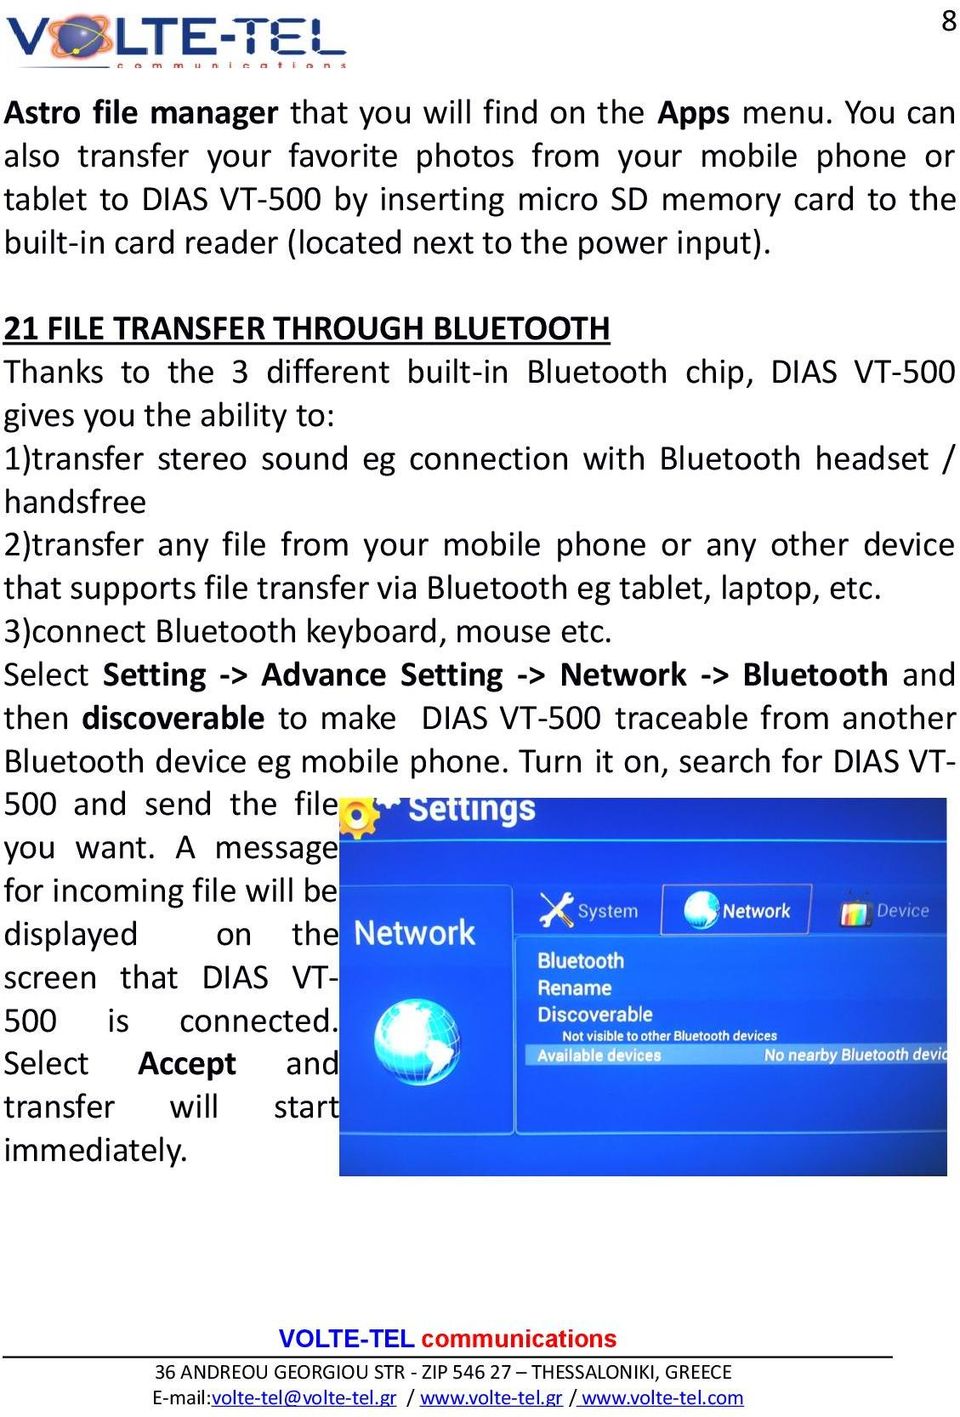 21 FILE TRANSFER THROUGH BLUETOOTH Thanks to the 3 different built-in Bluetooth chip, DIAS VT-500 gives you the ability to: 1)transfer stereo sound eg connection with Bluetooth headset / handsfree